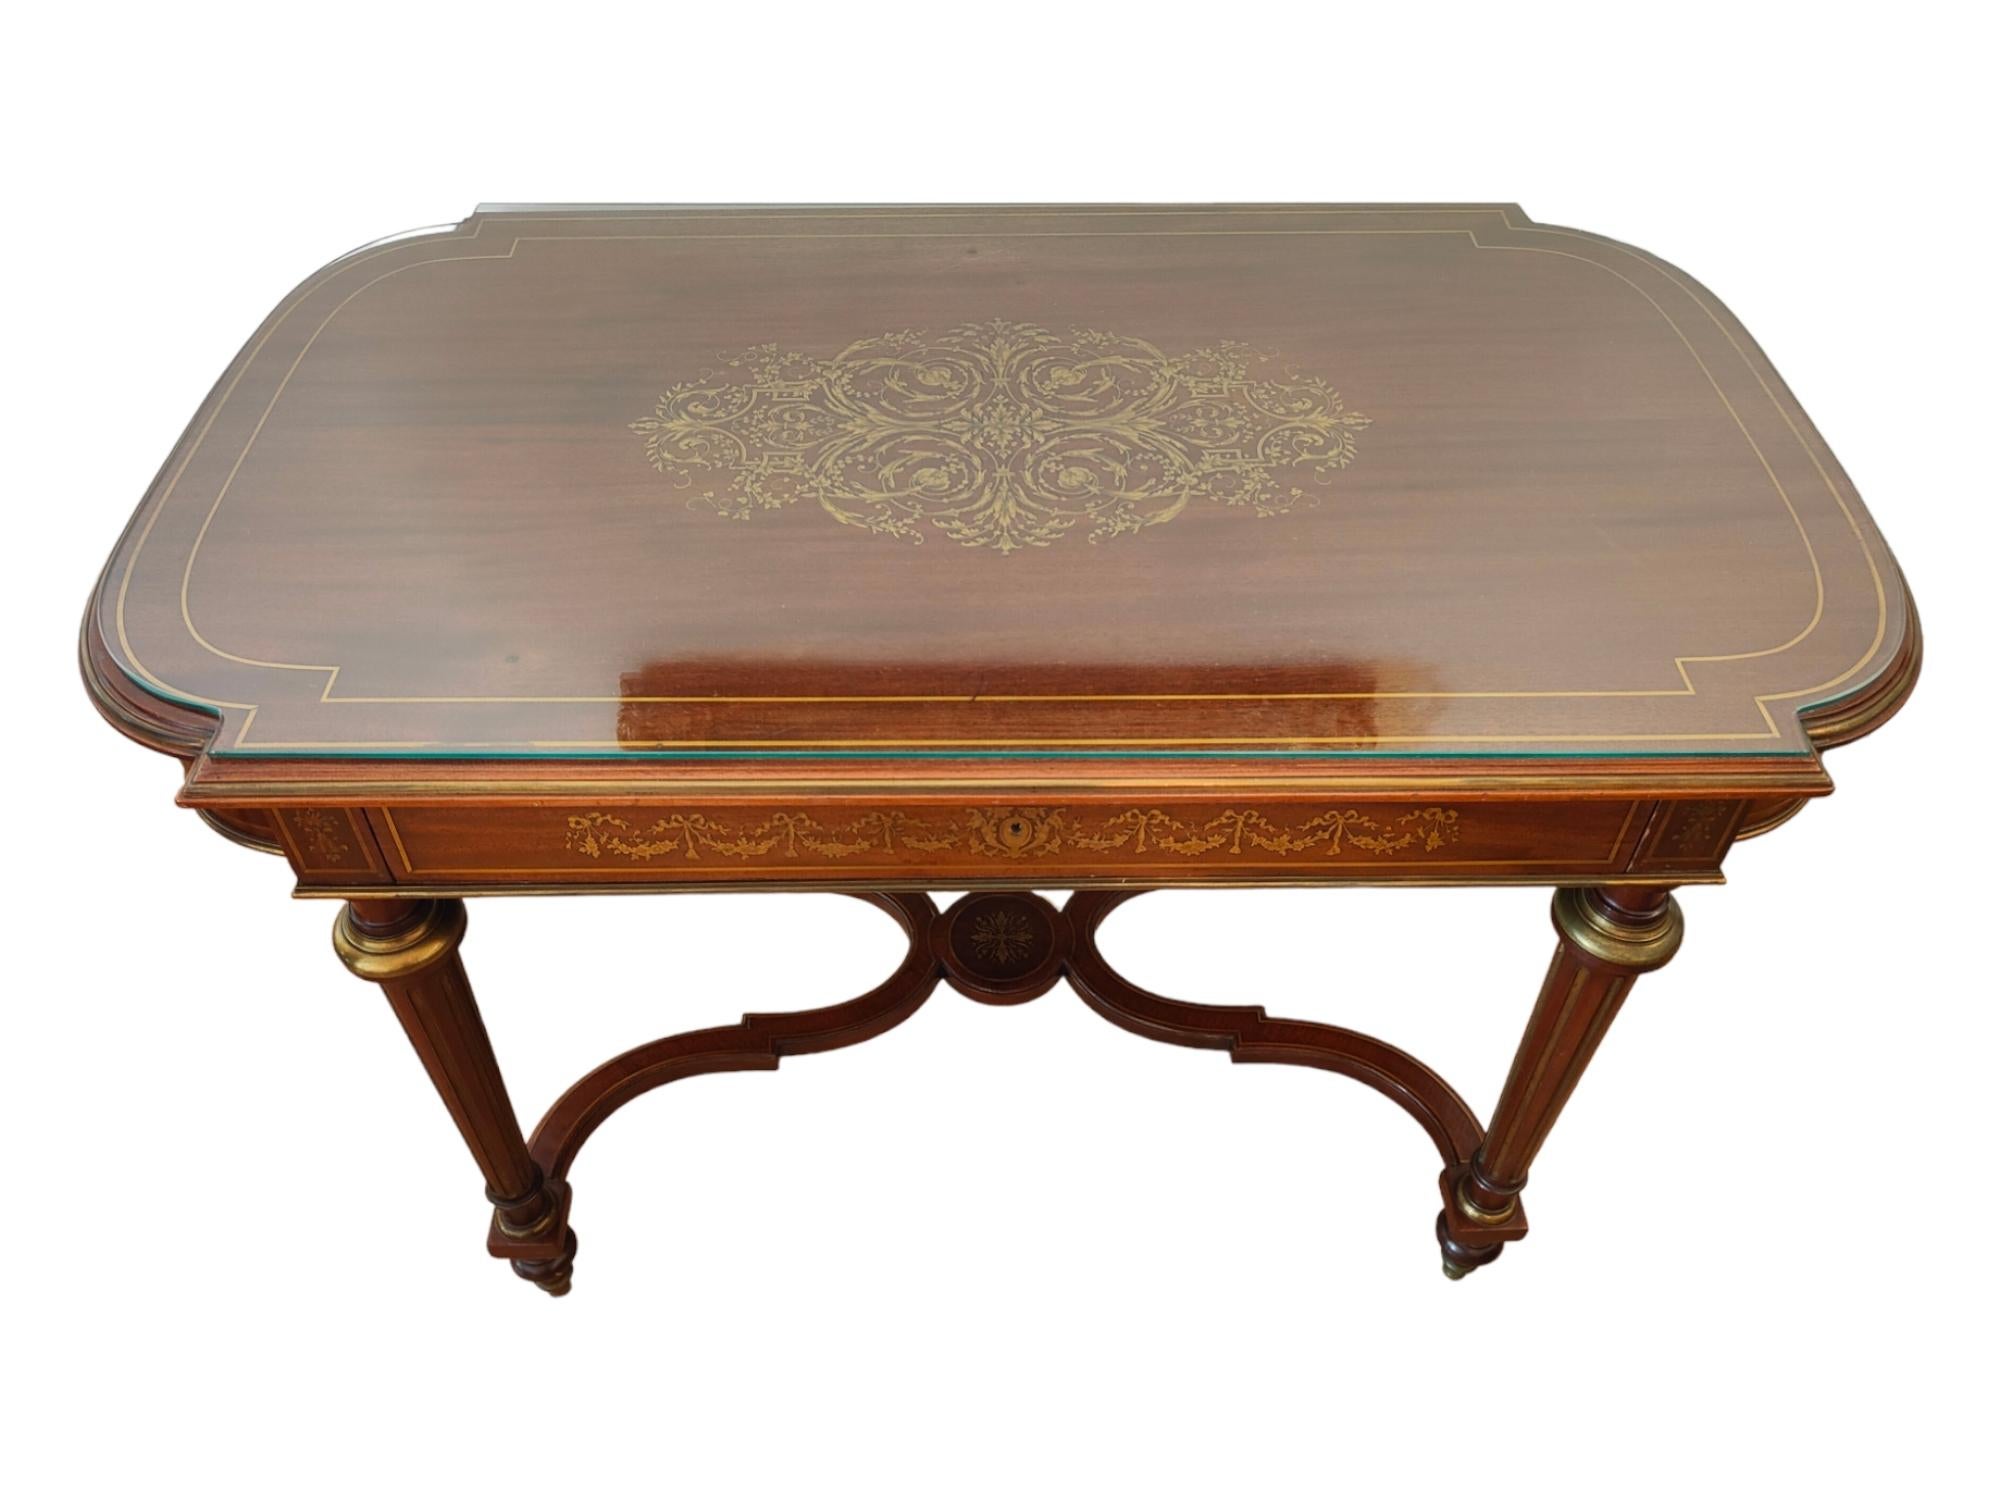 Late 19th Century Elegant French Table with Marquetry from the 19th Century